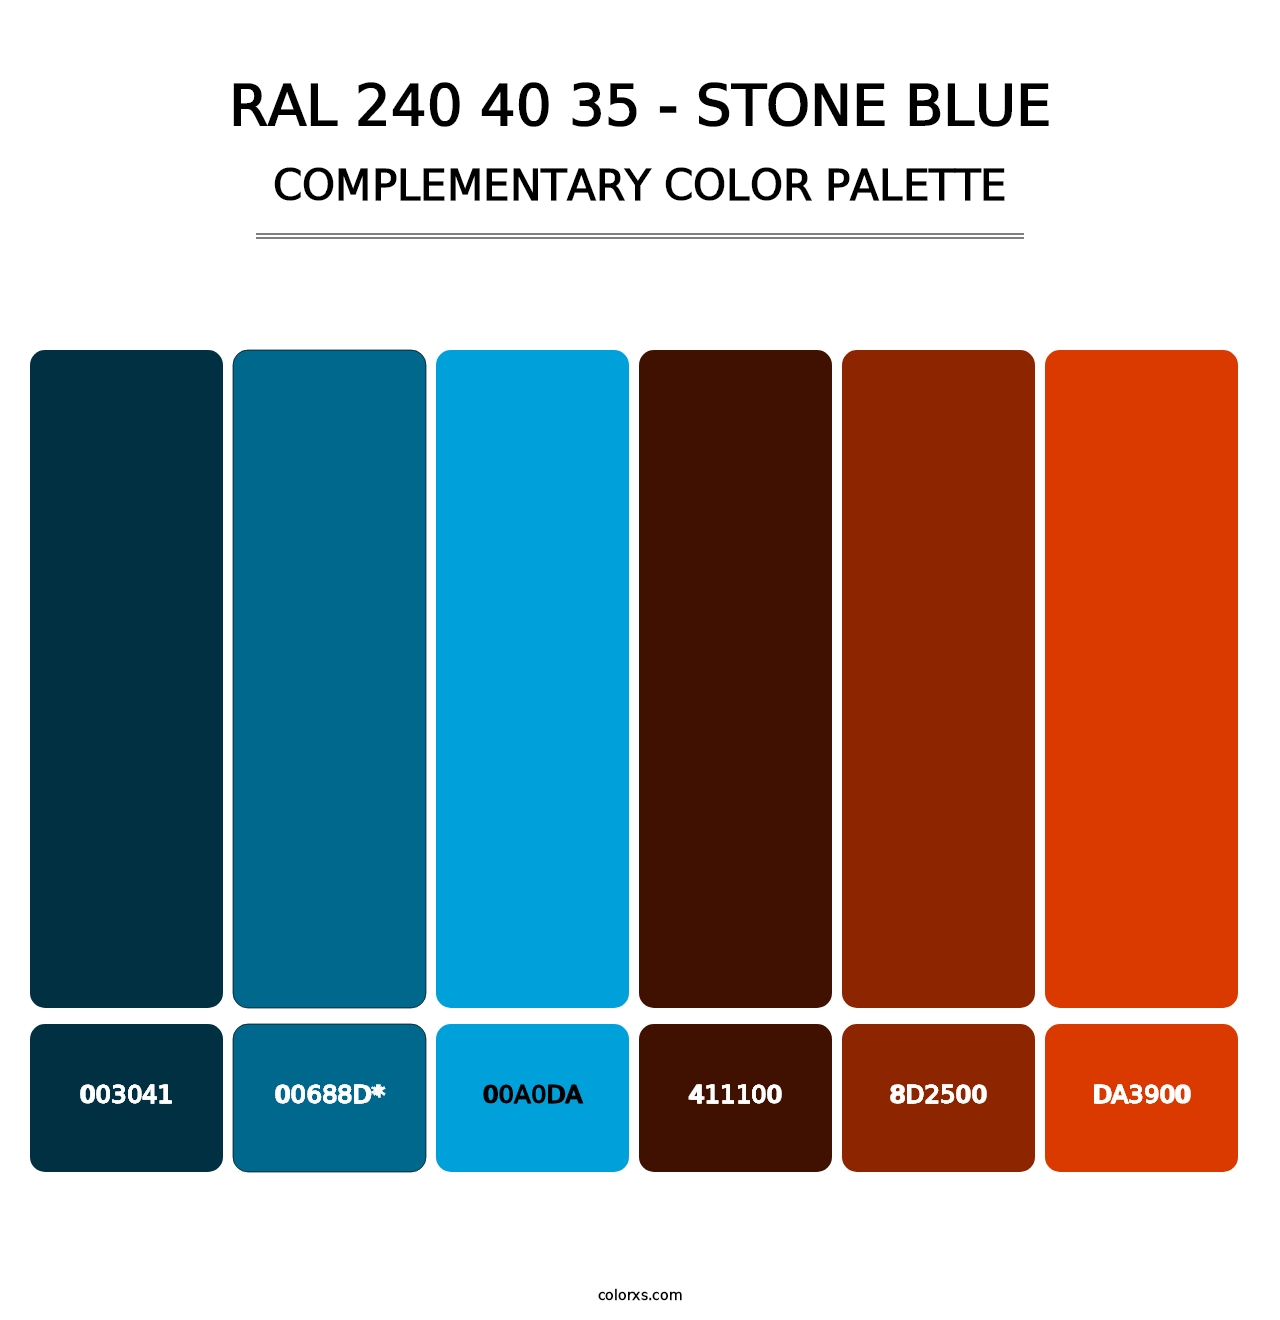 RAL 240 40 35 - Stone Blue - Complementary Color Palette